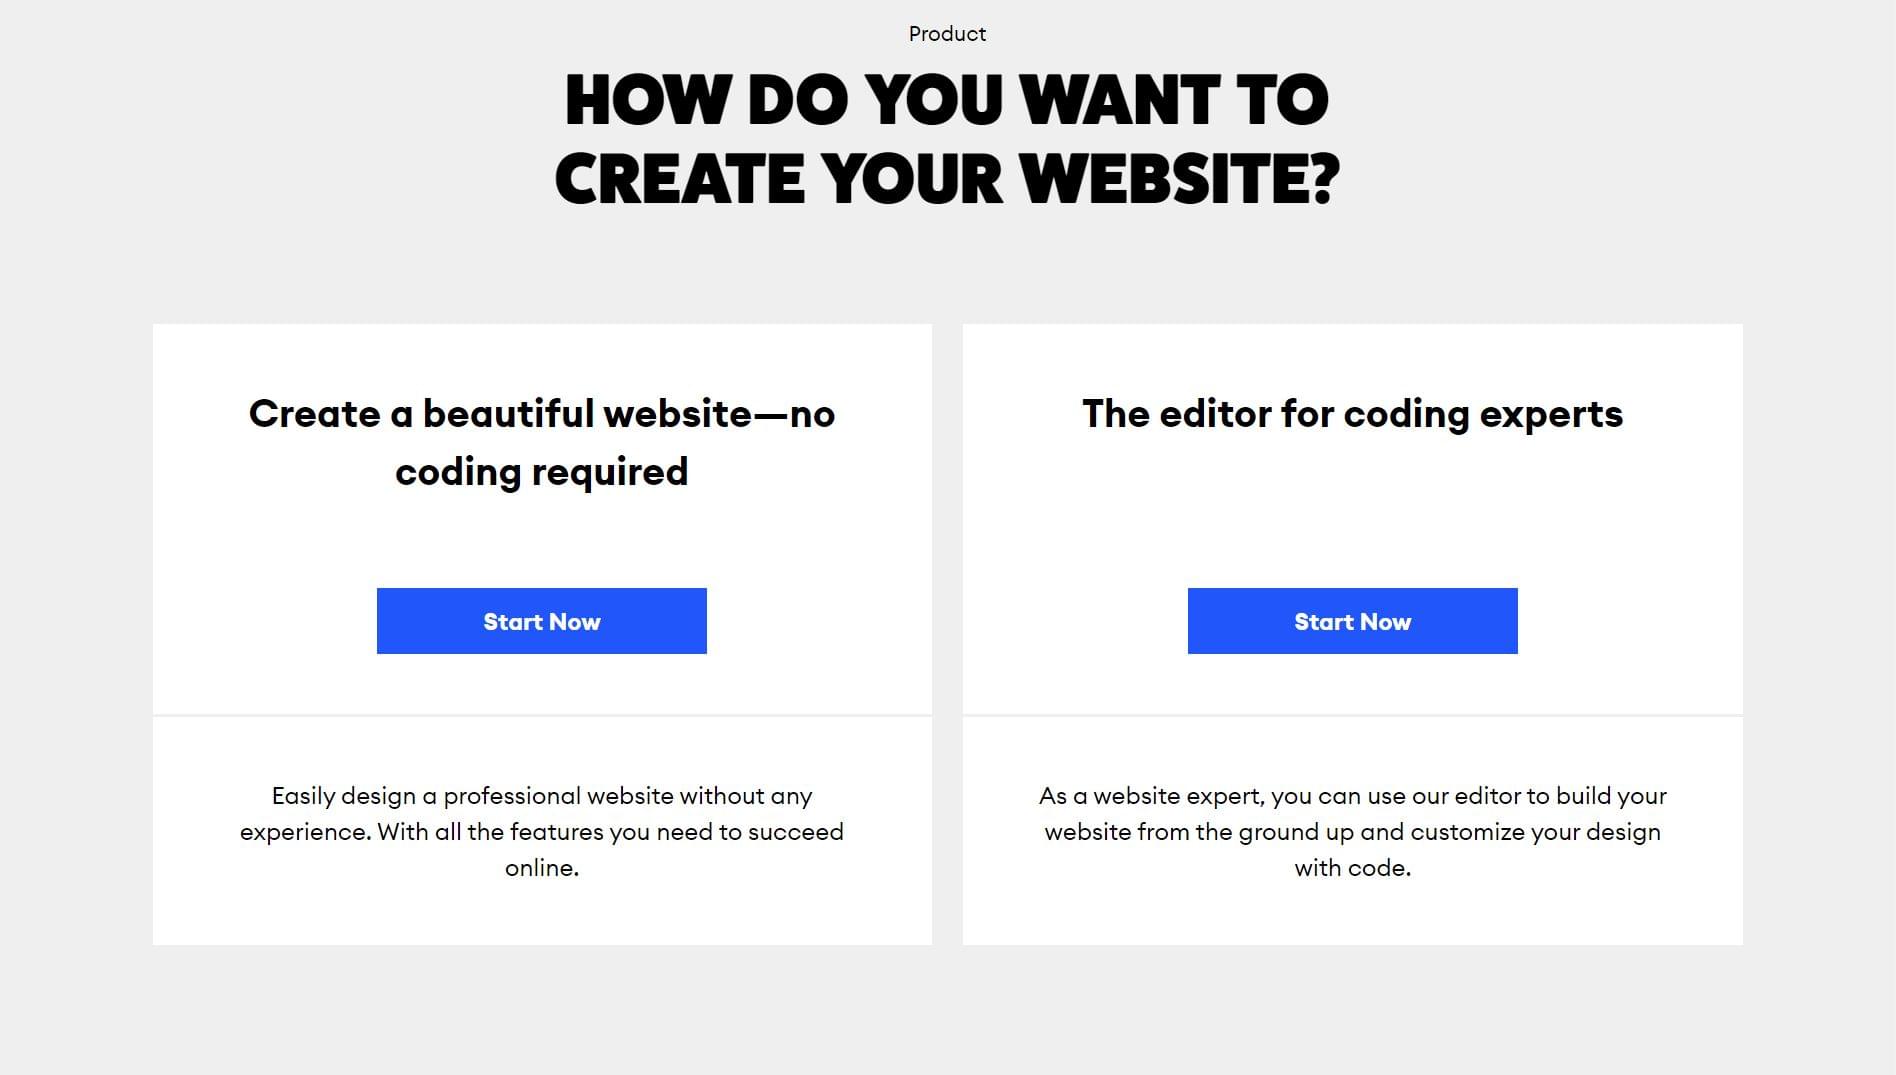 How do you want to create your website?